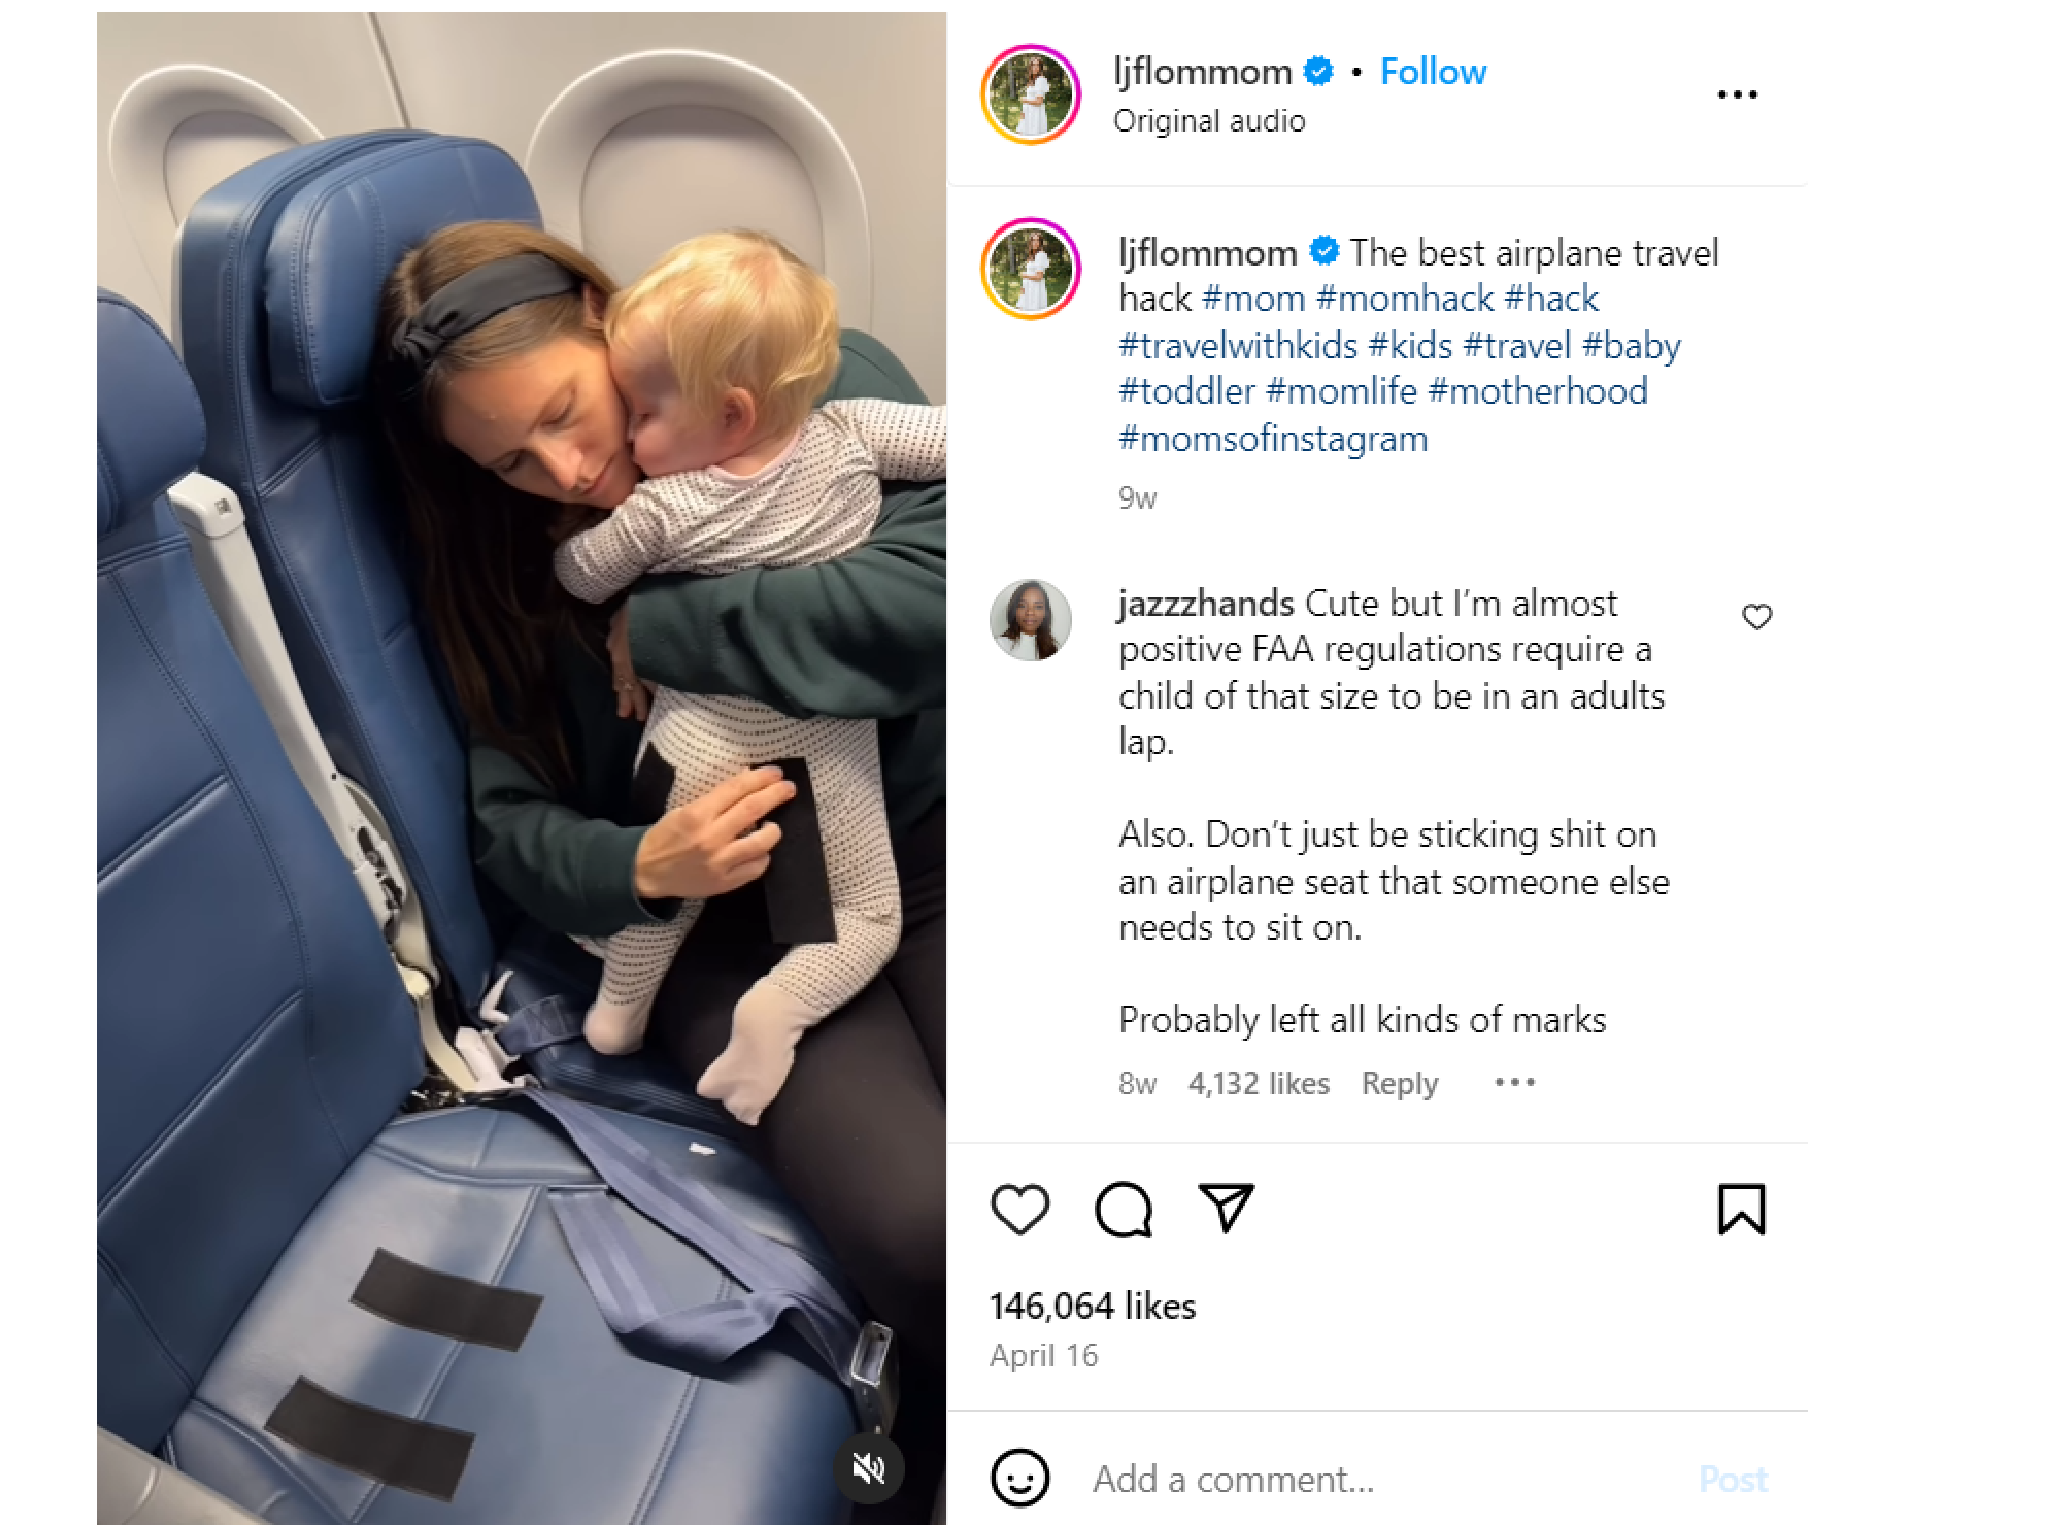 The mother shared how four fastening strips made a massive difference to her flight with a child